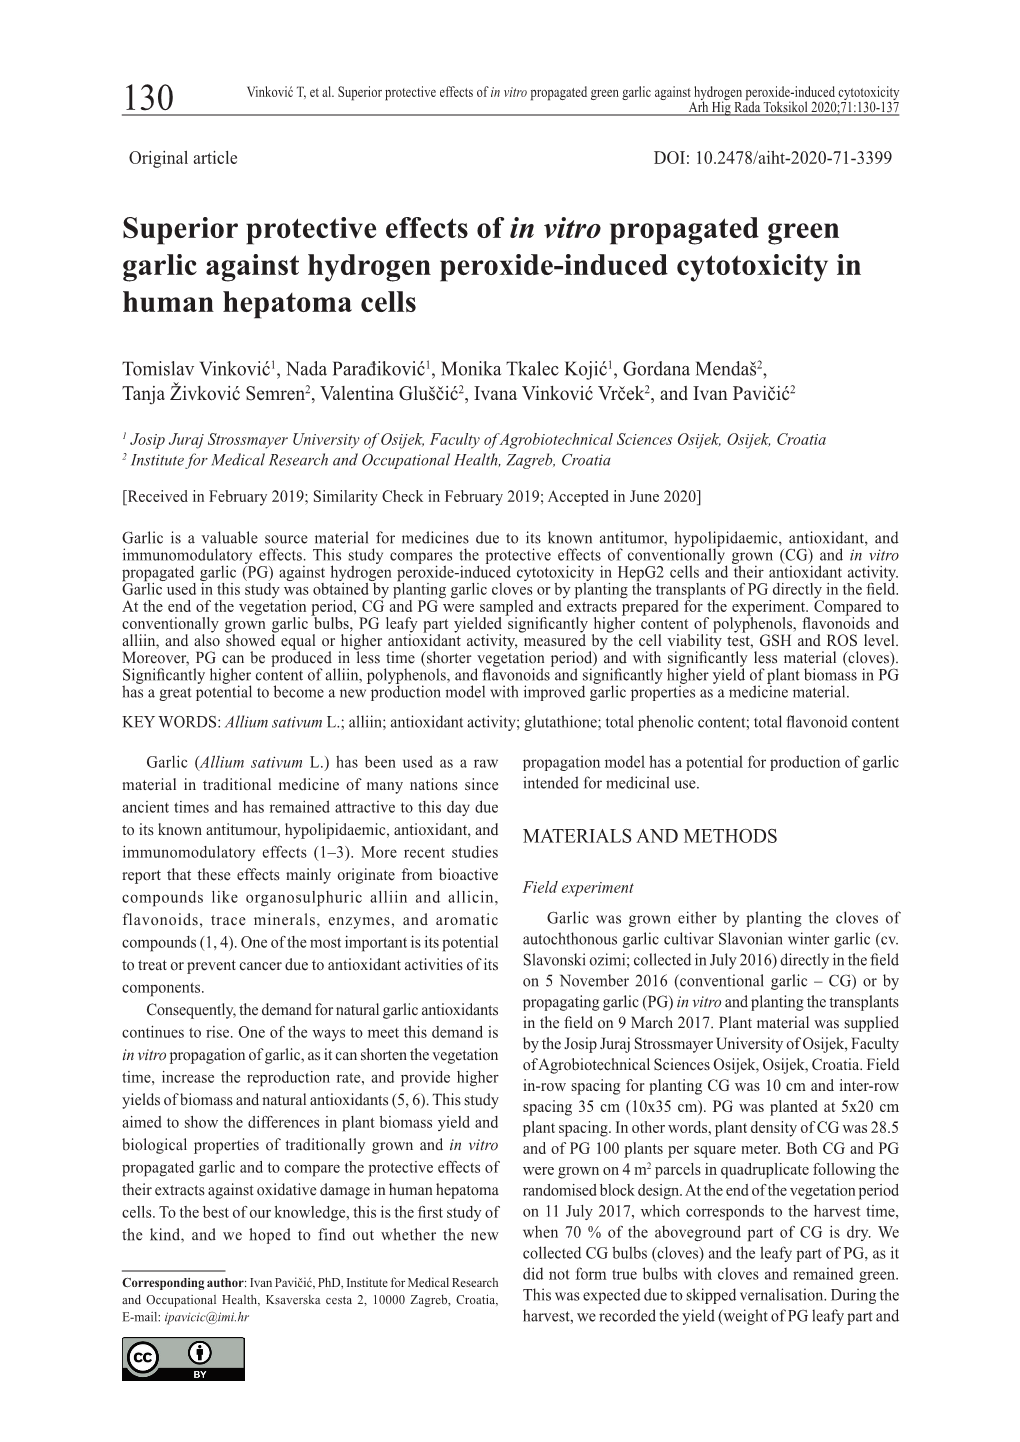 Superior Protective Effects of in Vitro Propagated Green Garlic Against Hydrogen Peroxide-Induced Cytotoxicity 130 Arh Hig Rada Toksikol 2020;71:130-137